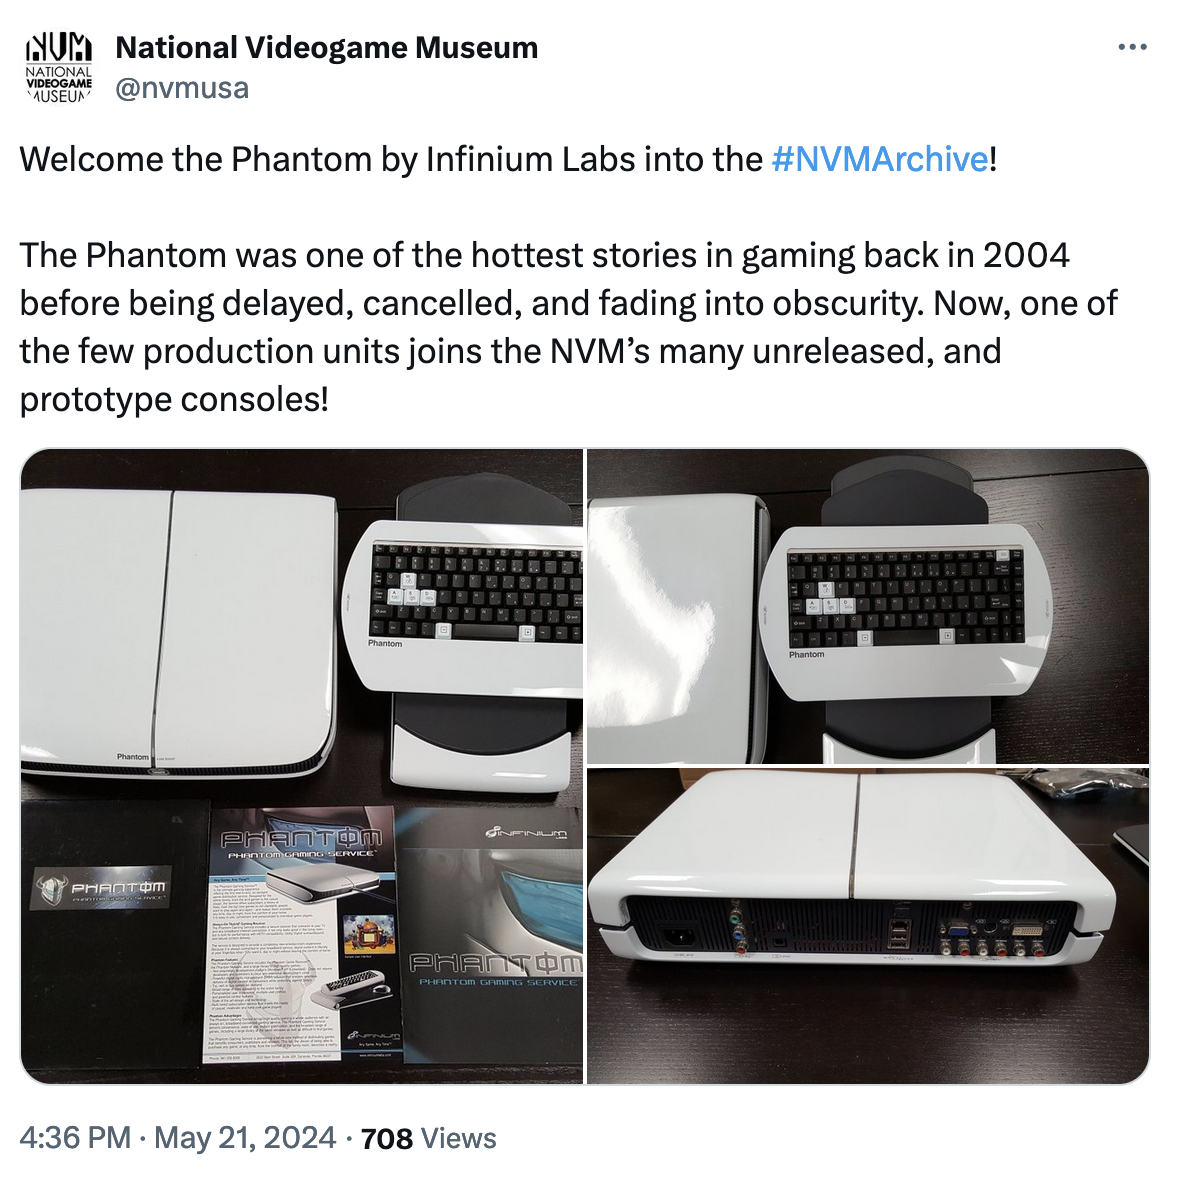 Welcome the Phantom by Infinium Labs into the #NVMArchive! The Phantom was one of the hottest stories in gaming back in 2004 before being delayed, cancelled, and fading into obscurity. Now, one of the few production units joins the NVM’s many unreleased, and prototype consoles!